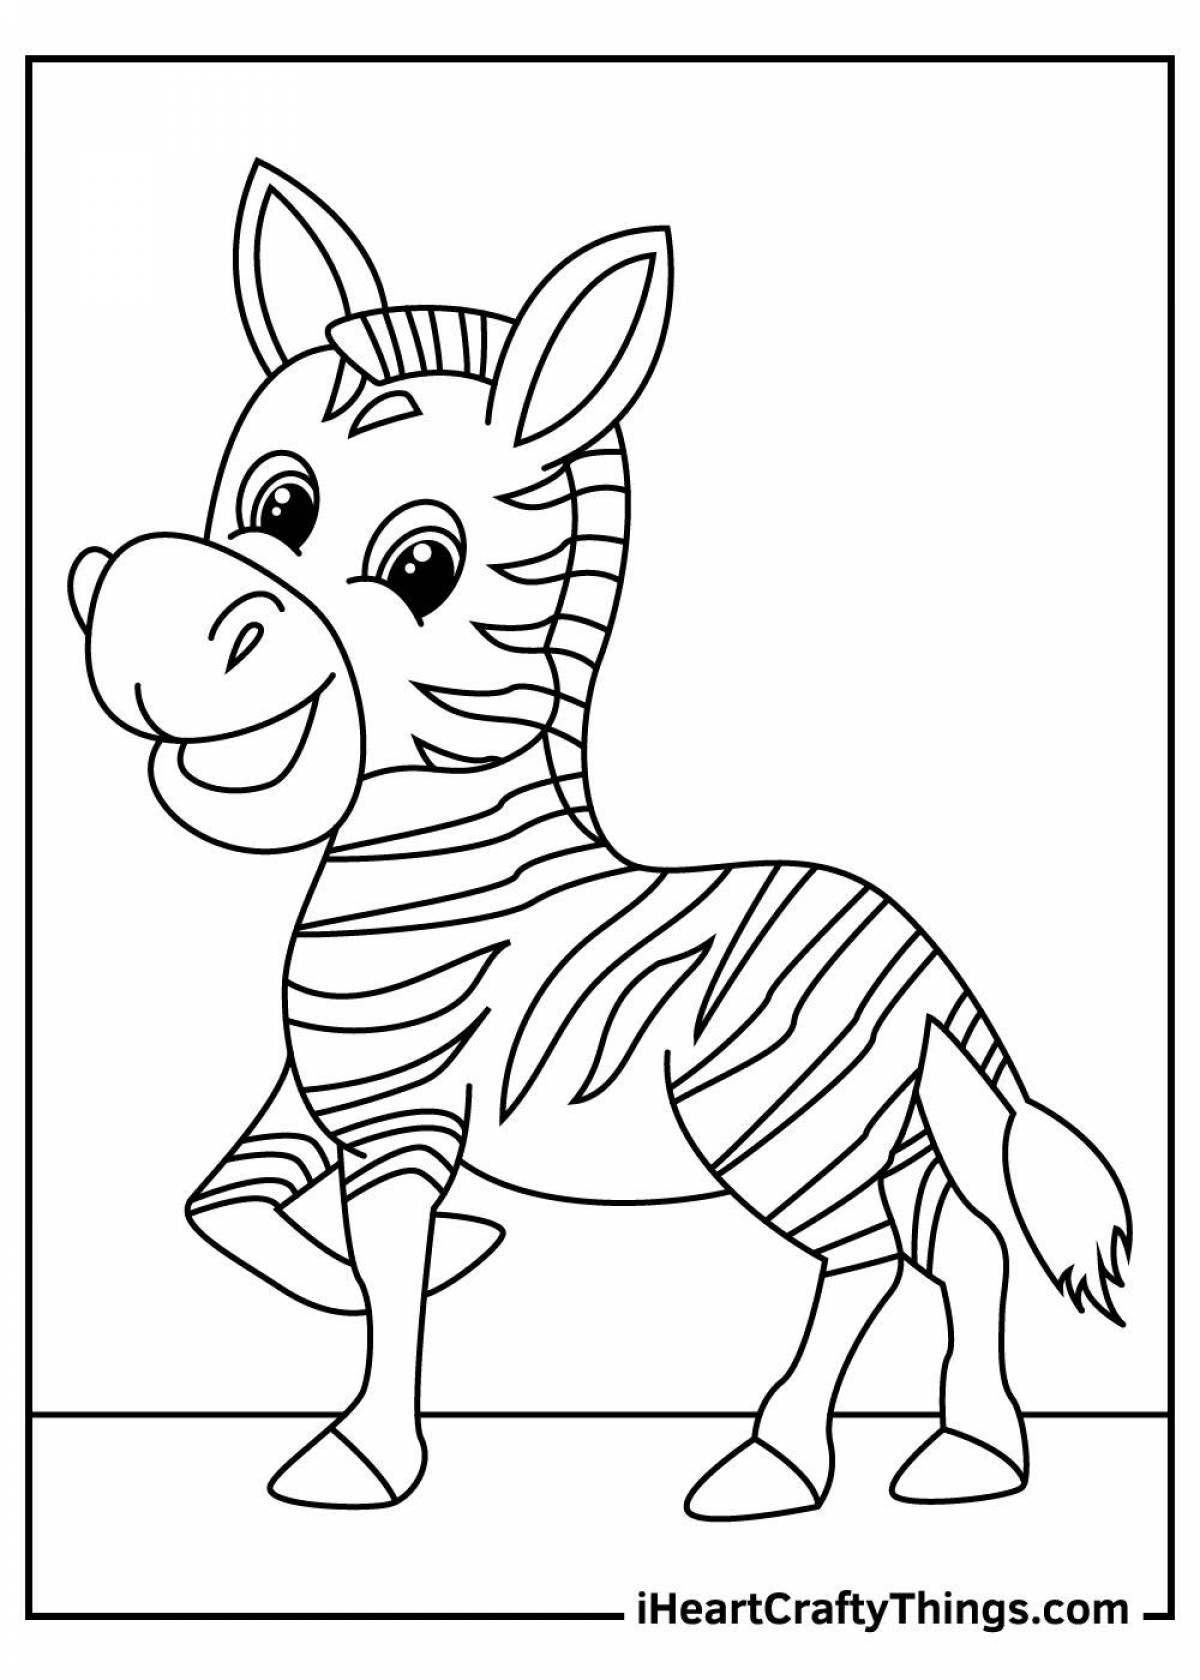 Zebra coloring pages with crazy coloring book for kids